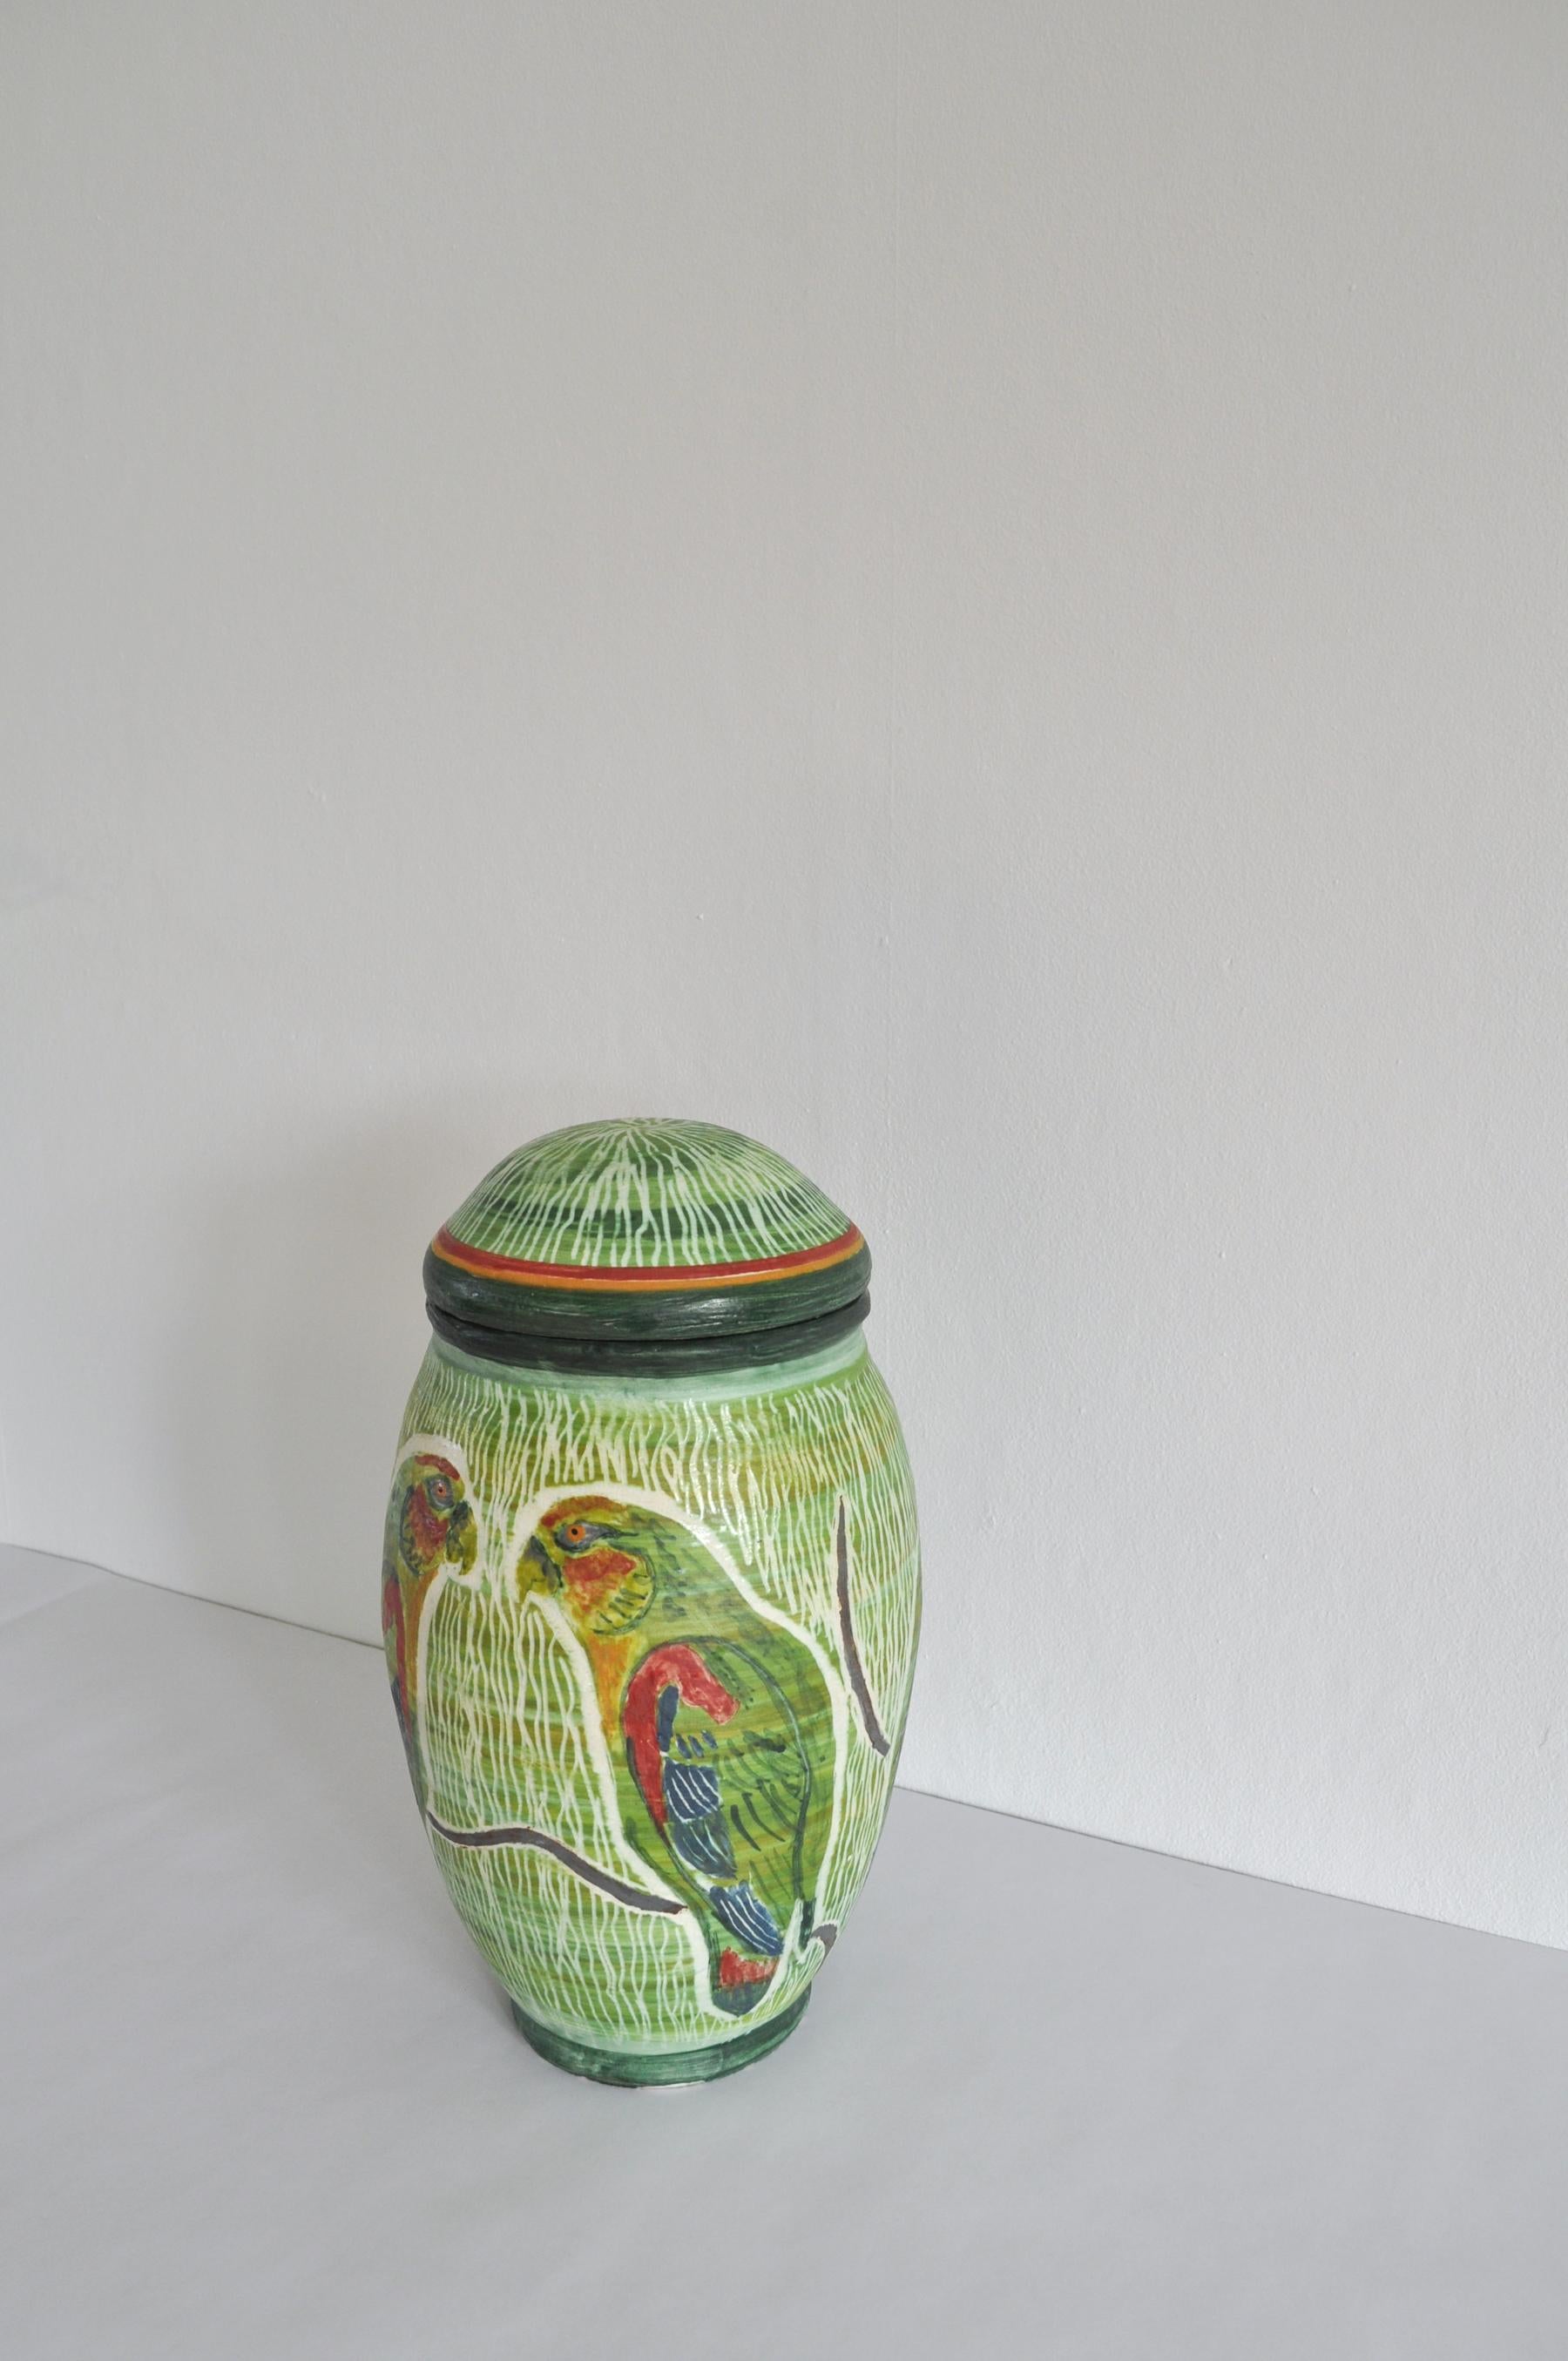 Contemporary Unique Hand-Thrown and Hand-Glazed Danish Ceramic Vase or Jar For Sale